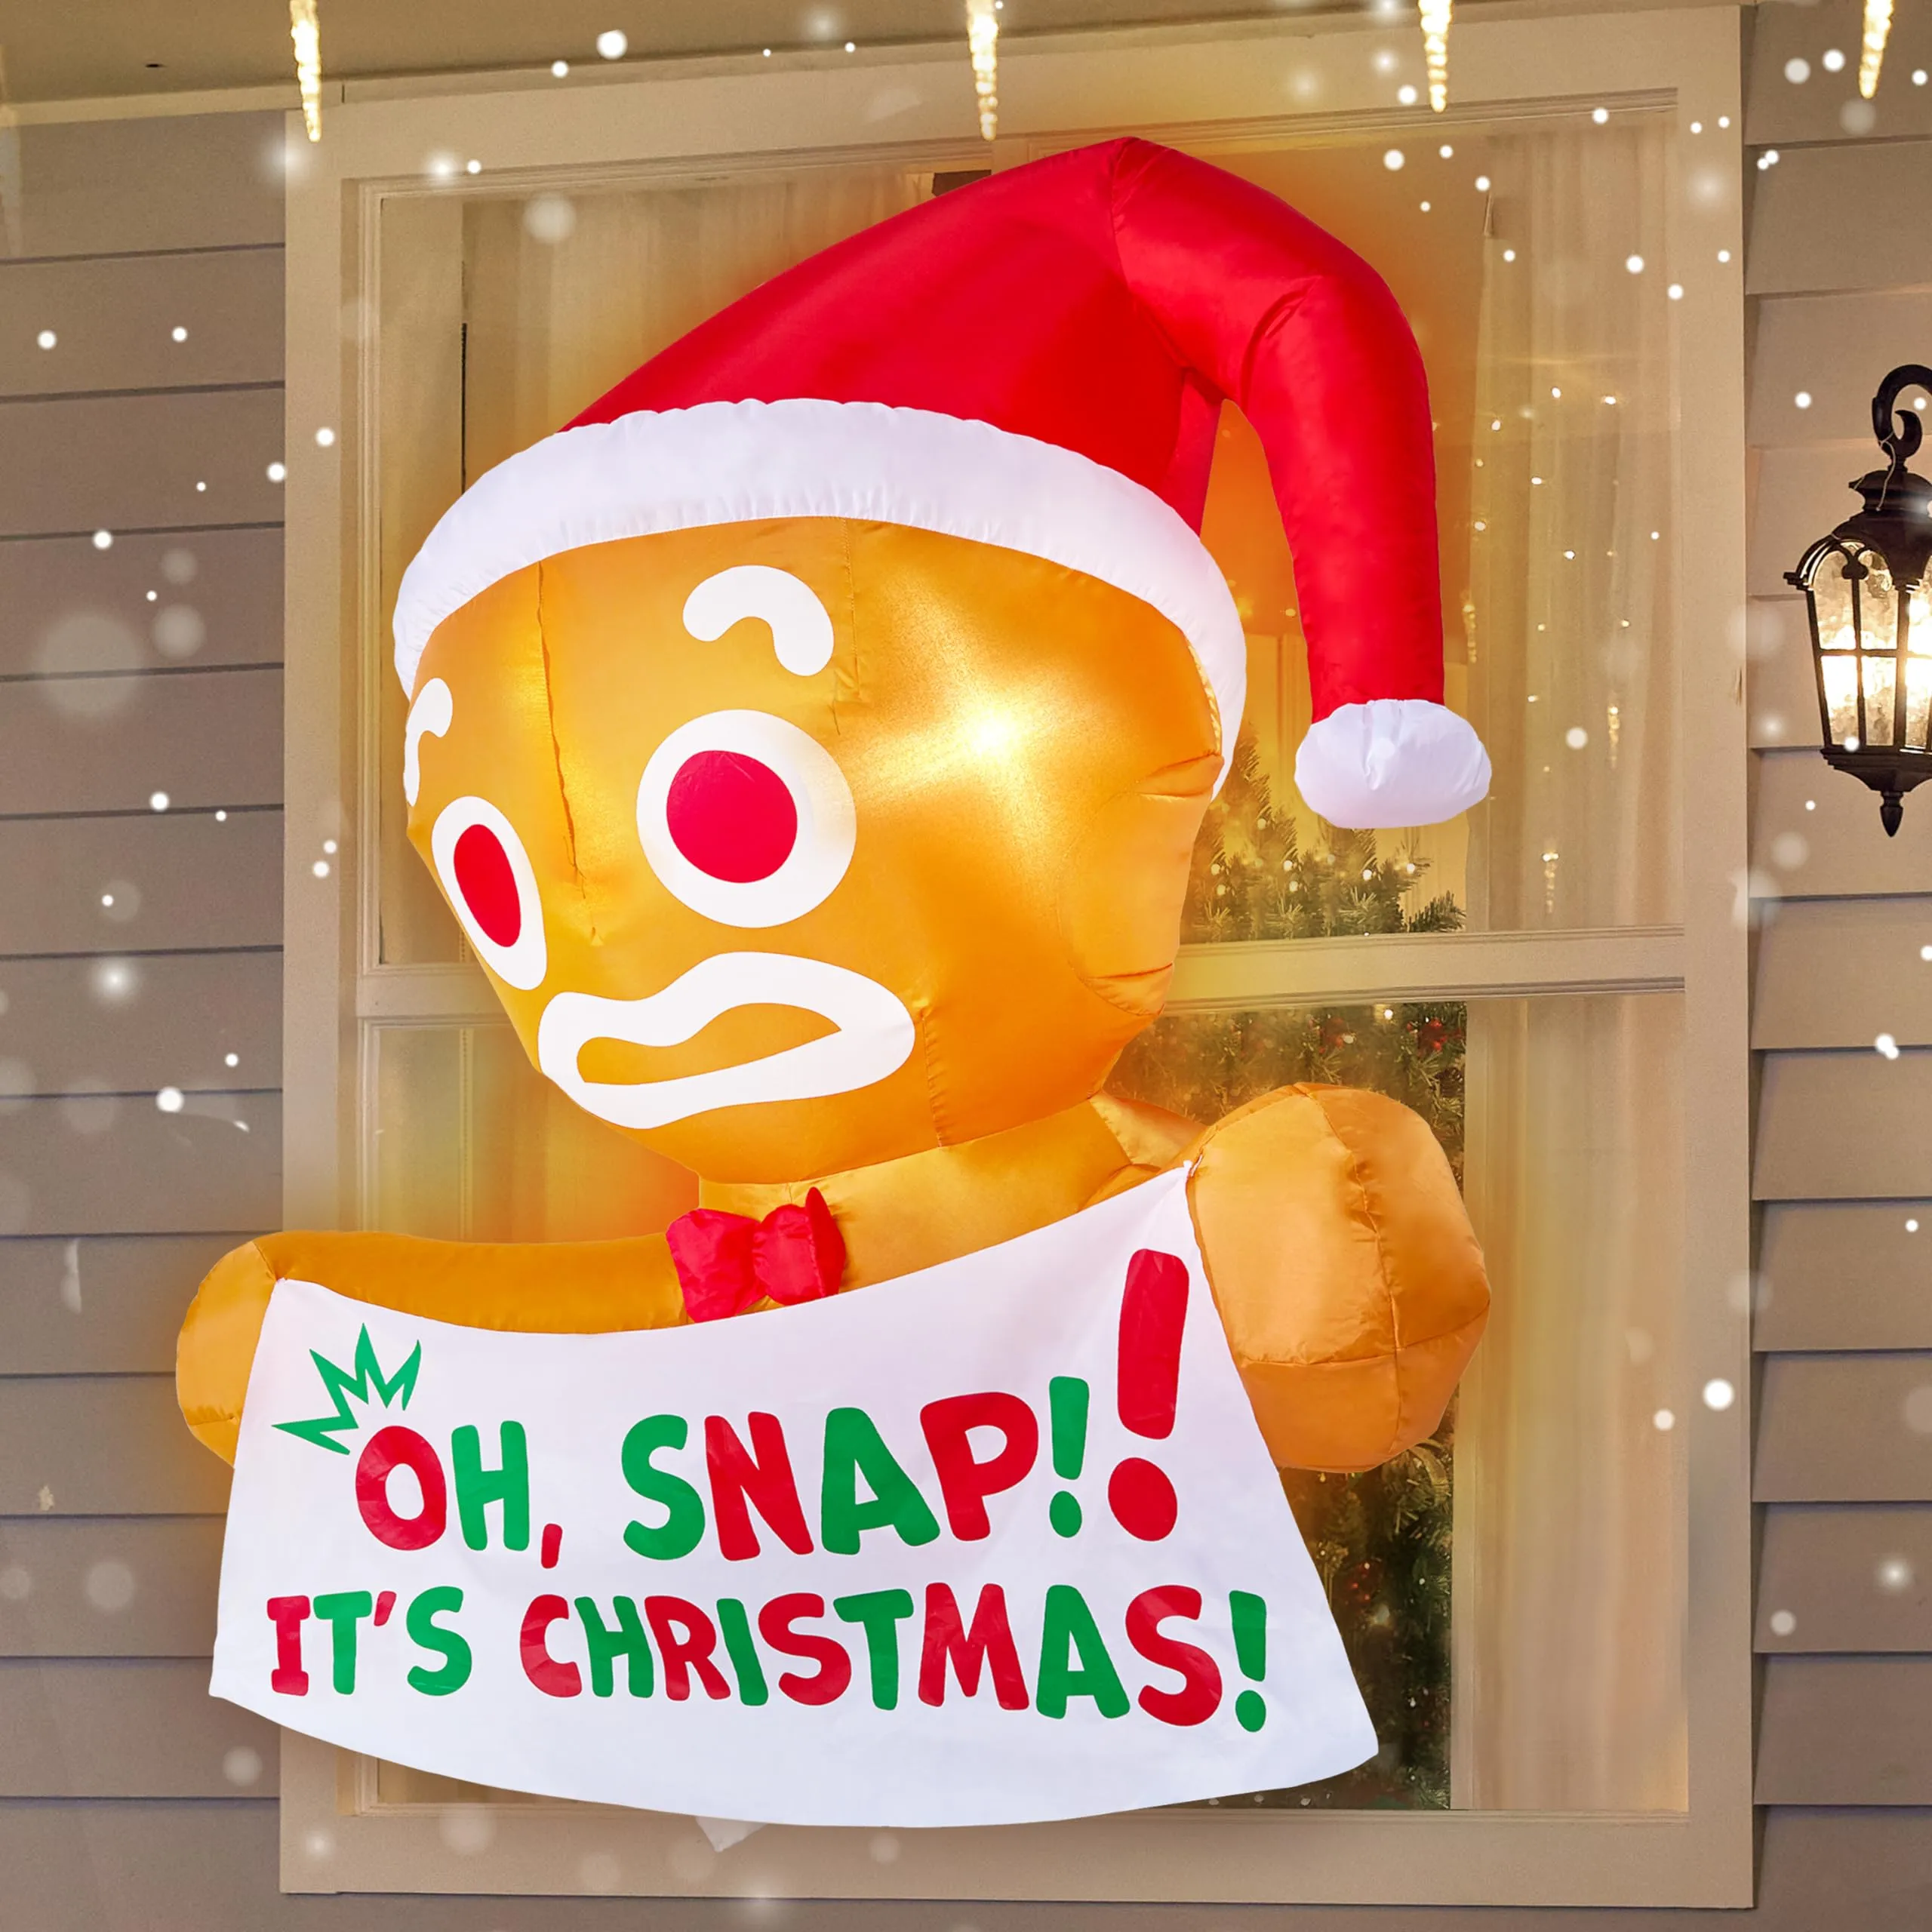 You are currently viewing 20 Gingerbread Christmas Decor Ideas for a Festive Home